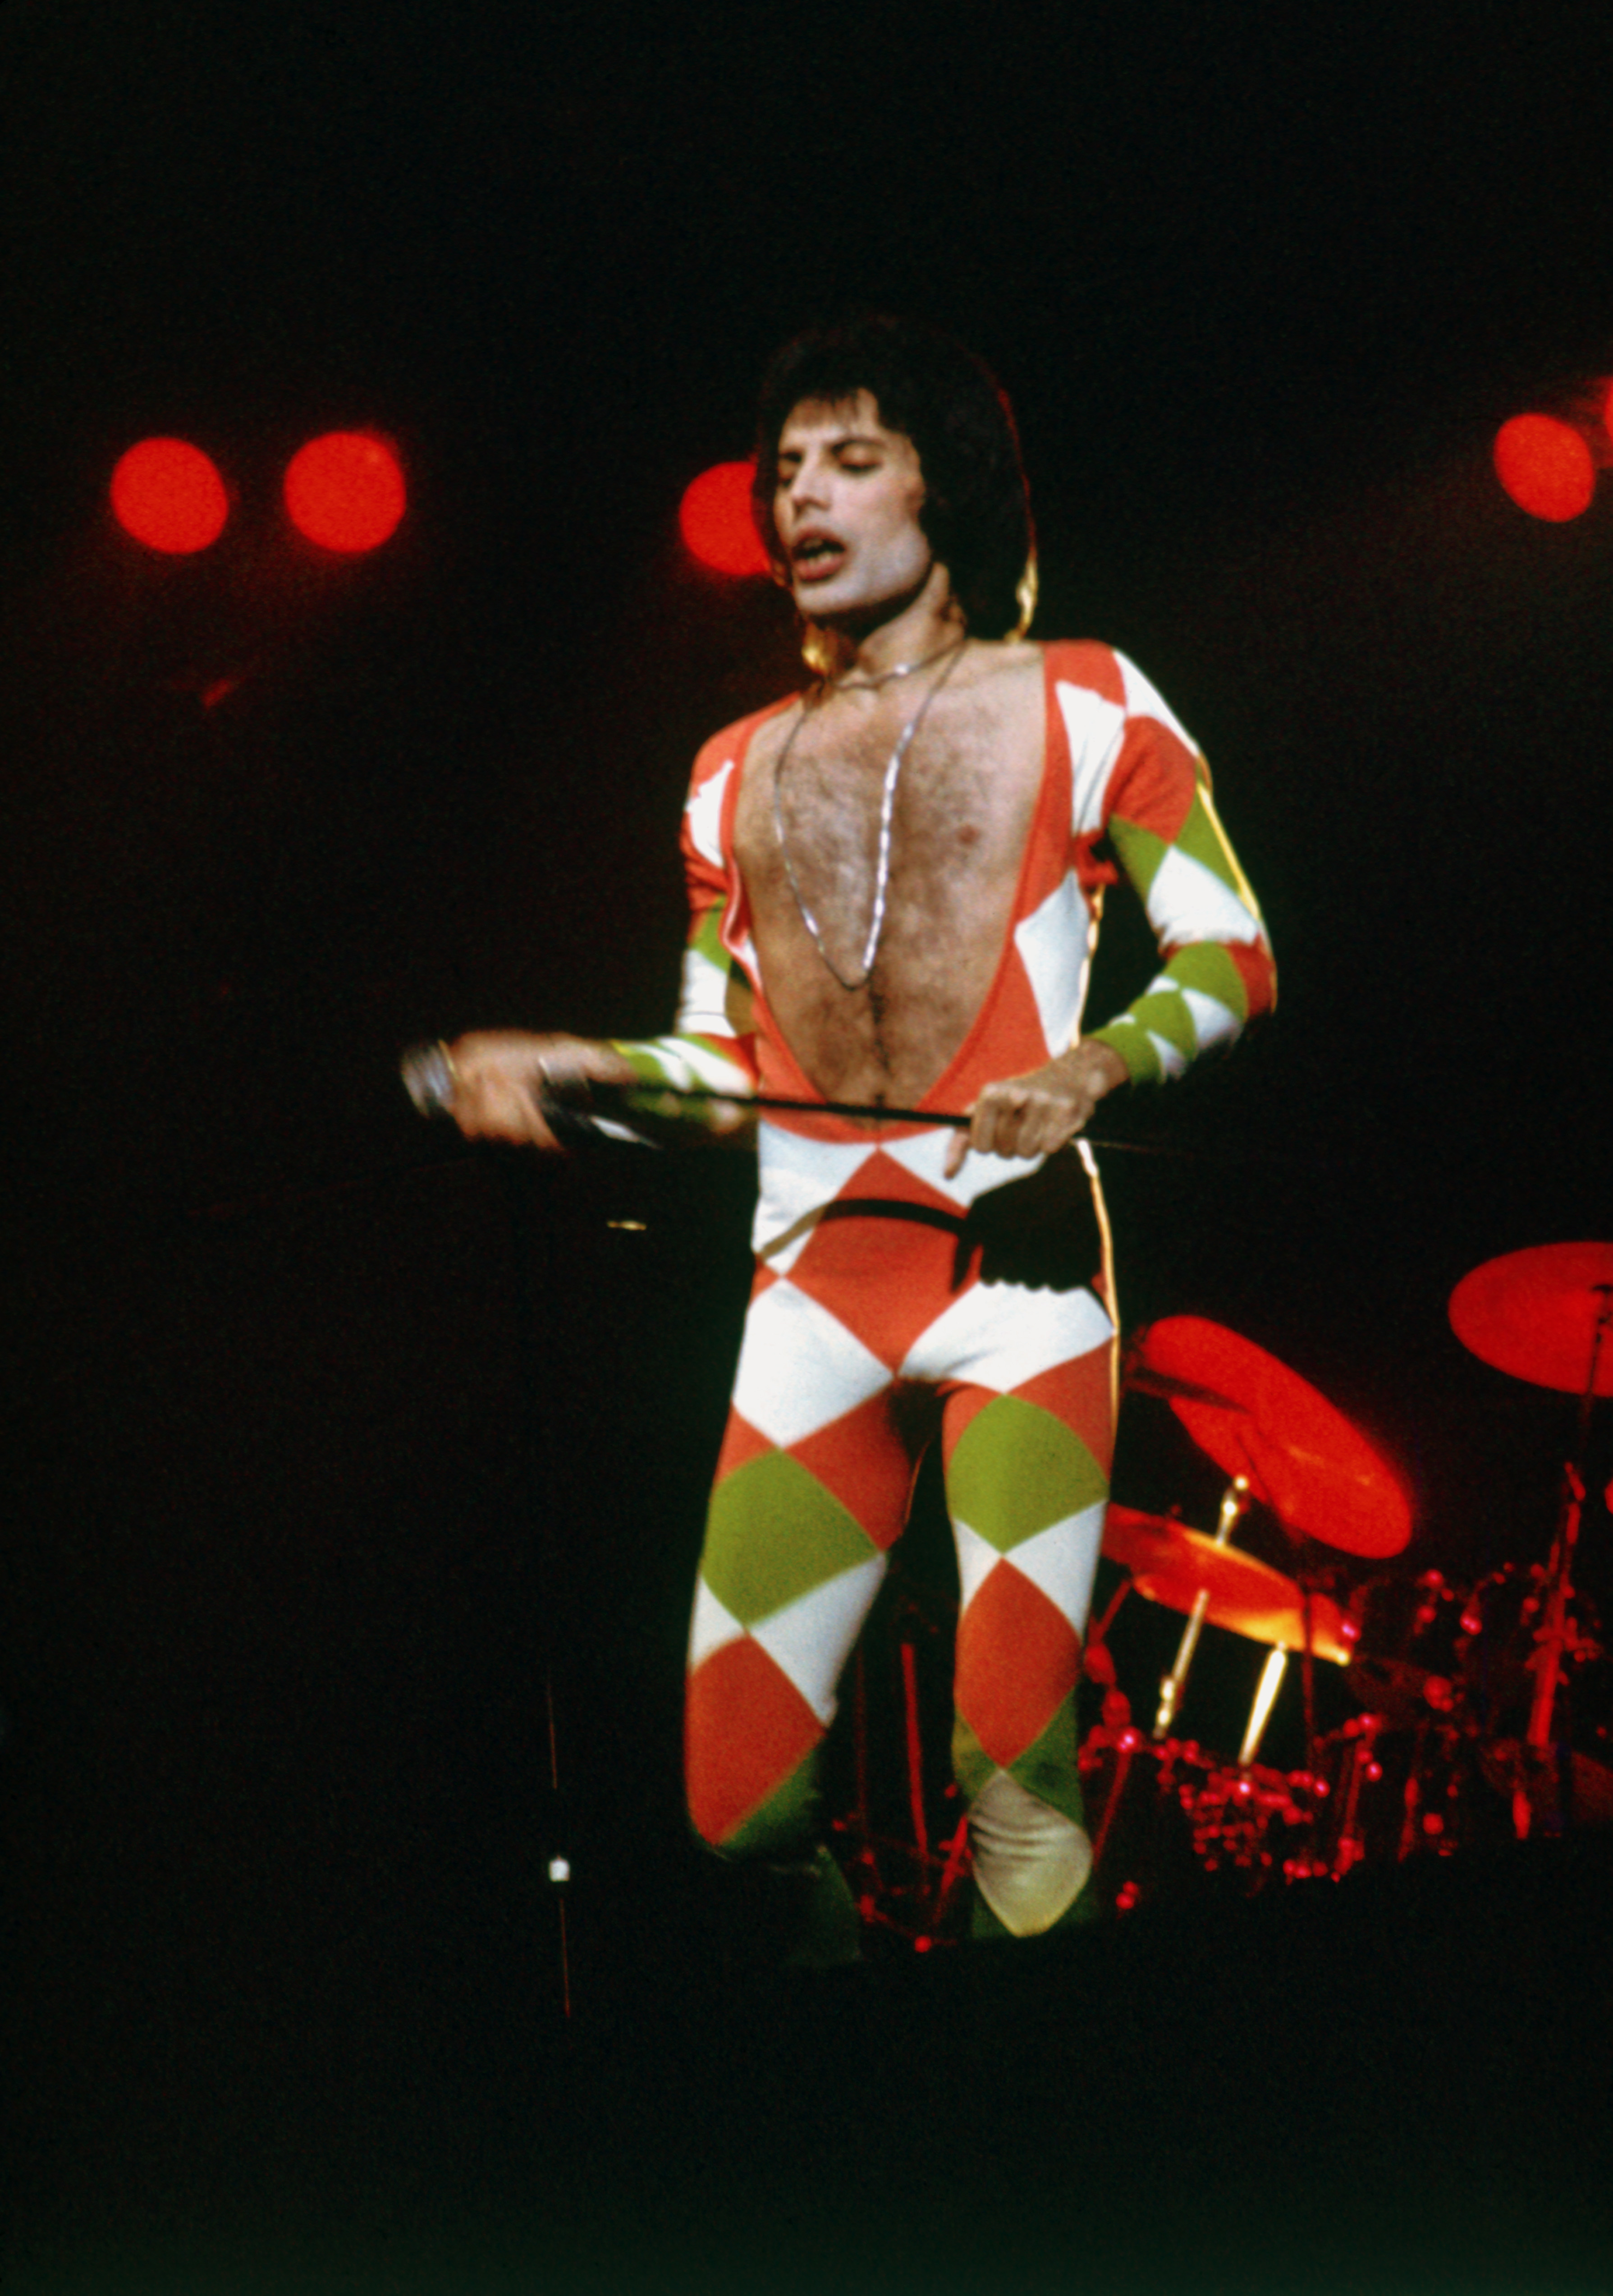 Freddie Mercury (1946 - 1991) in concert with his hard rock group Queen, June 1977. (Photo by Hulton Archive/Getty Images)